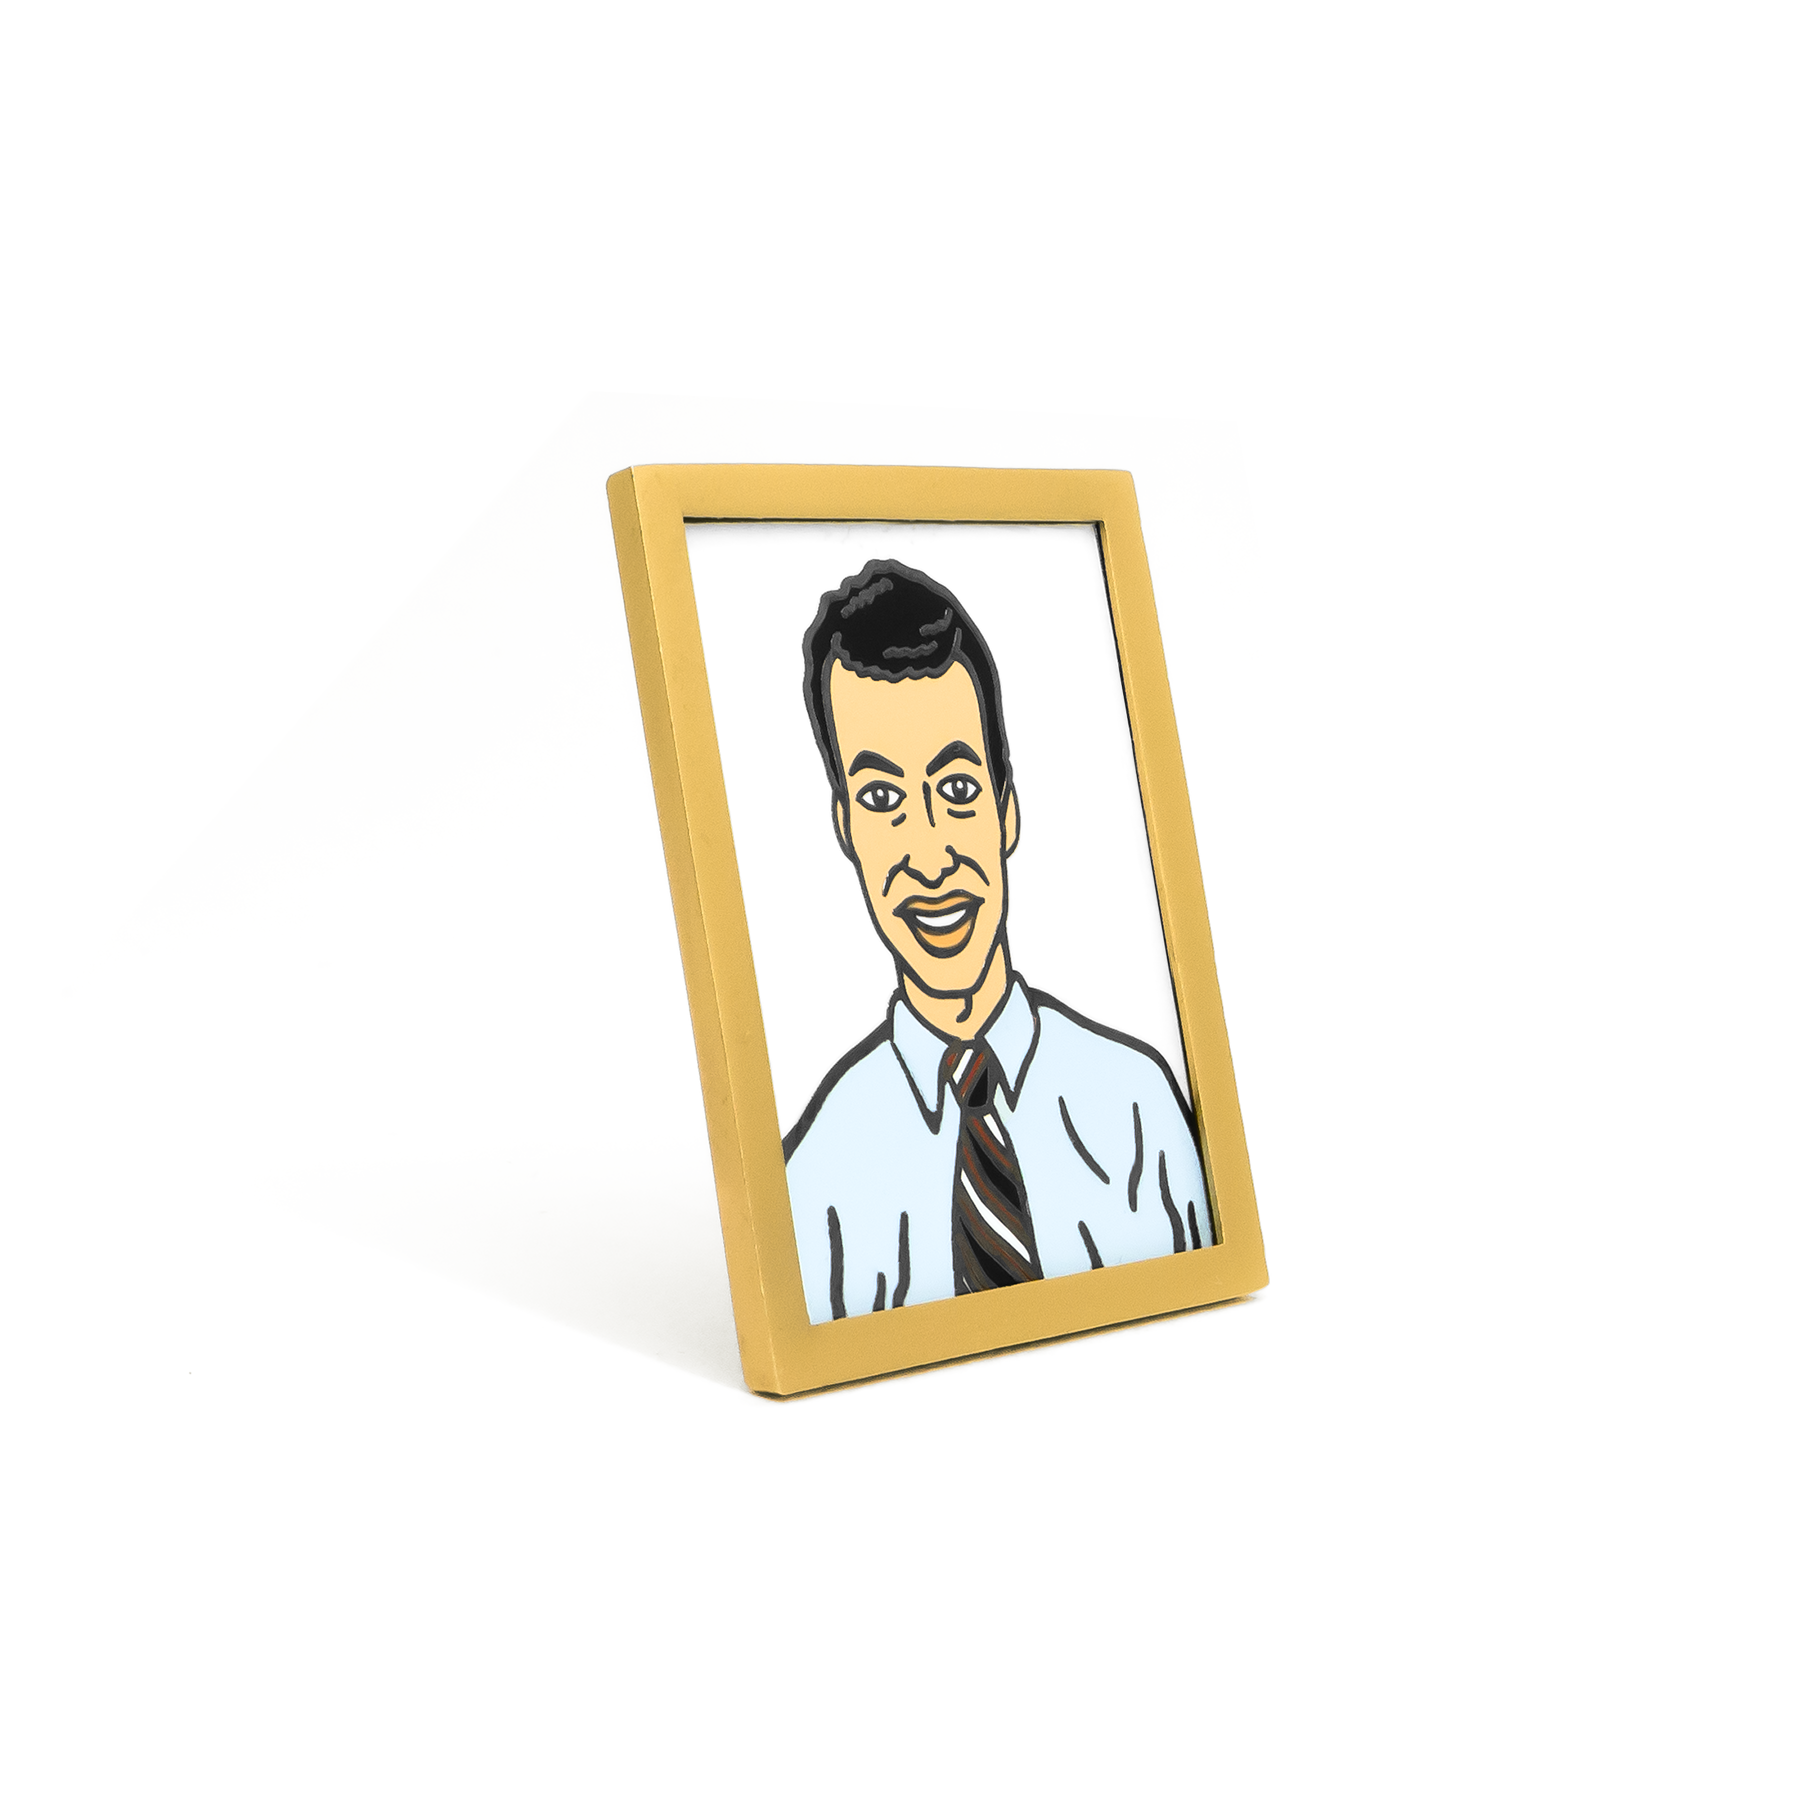 Employee of the Month enamel pin